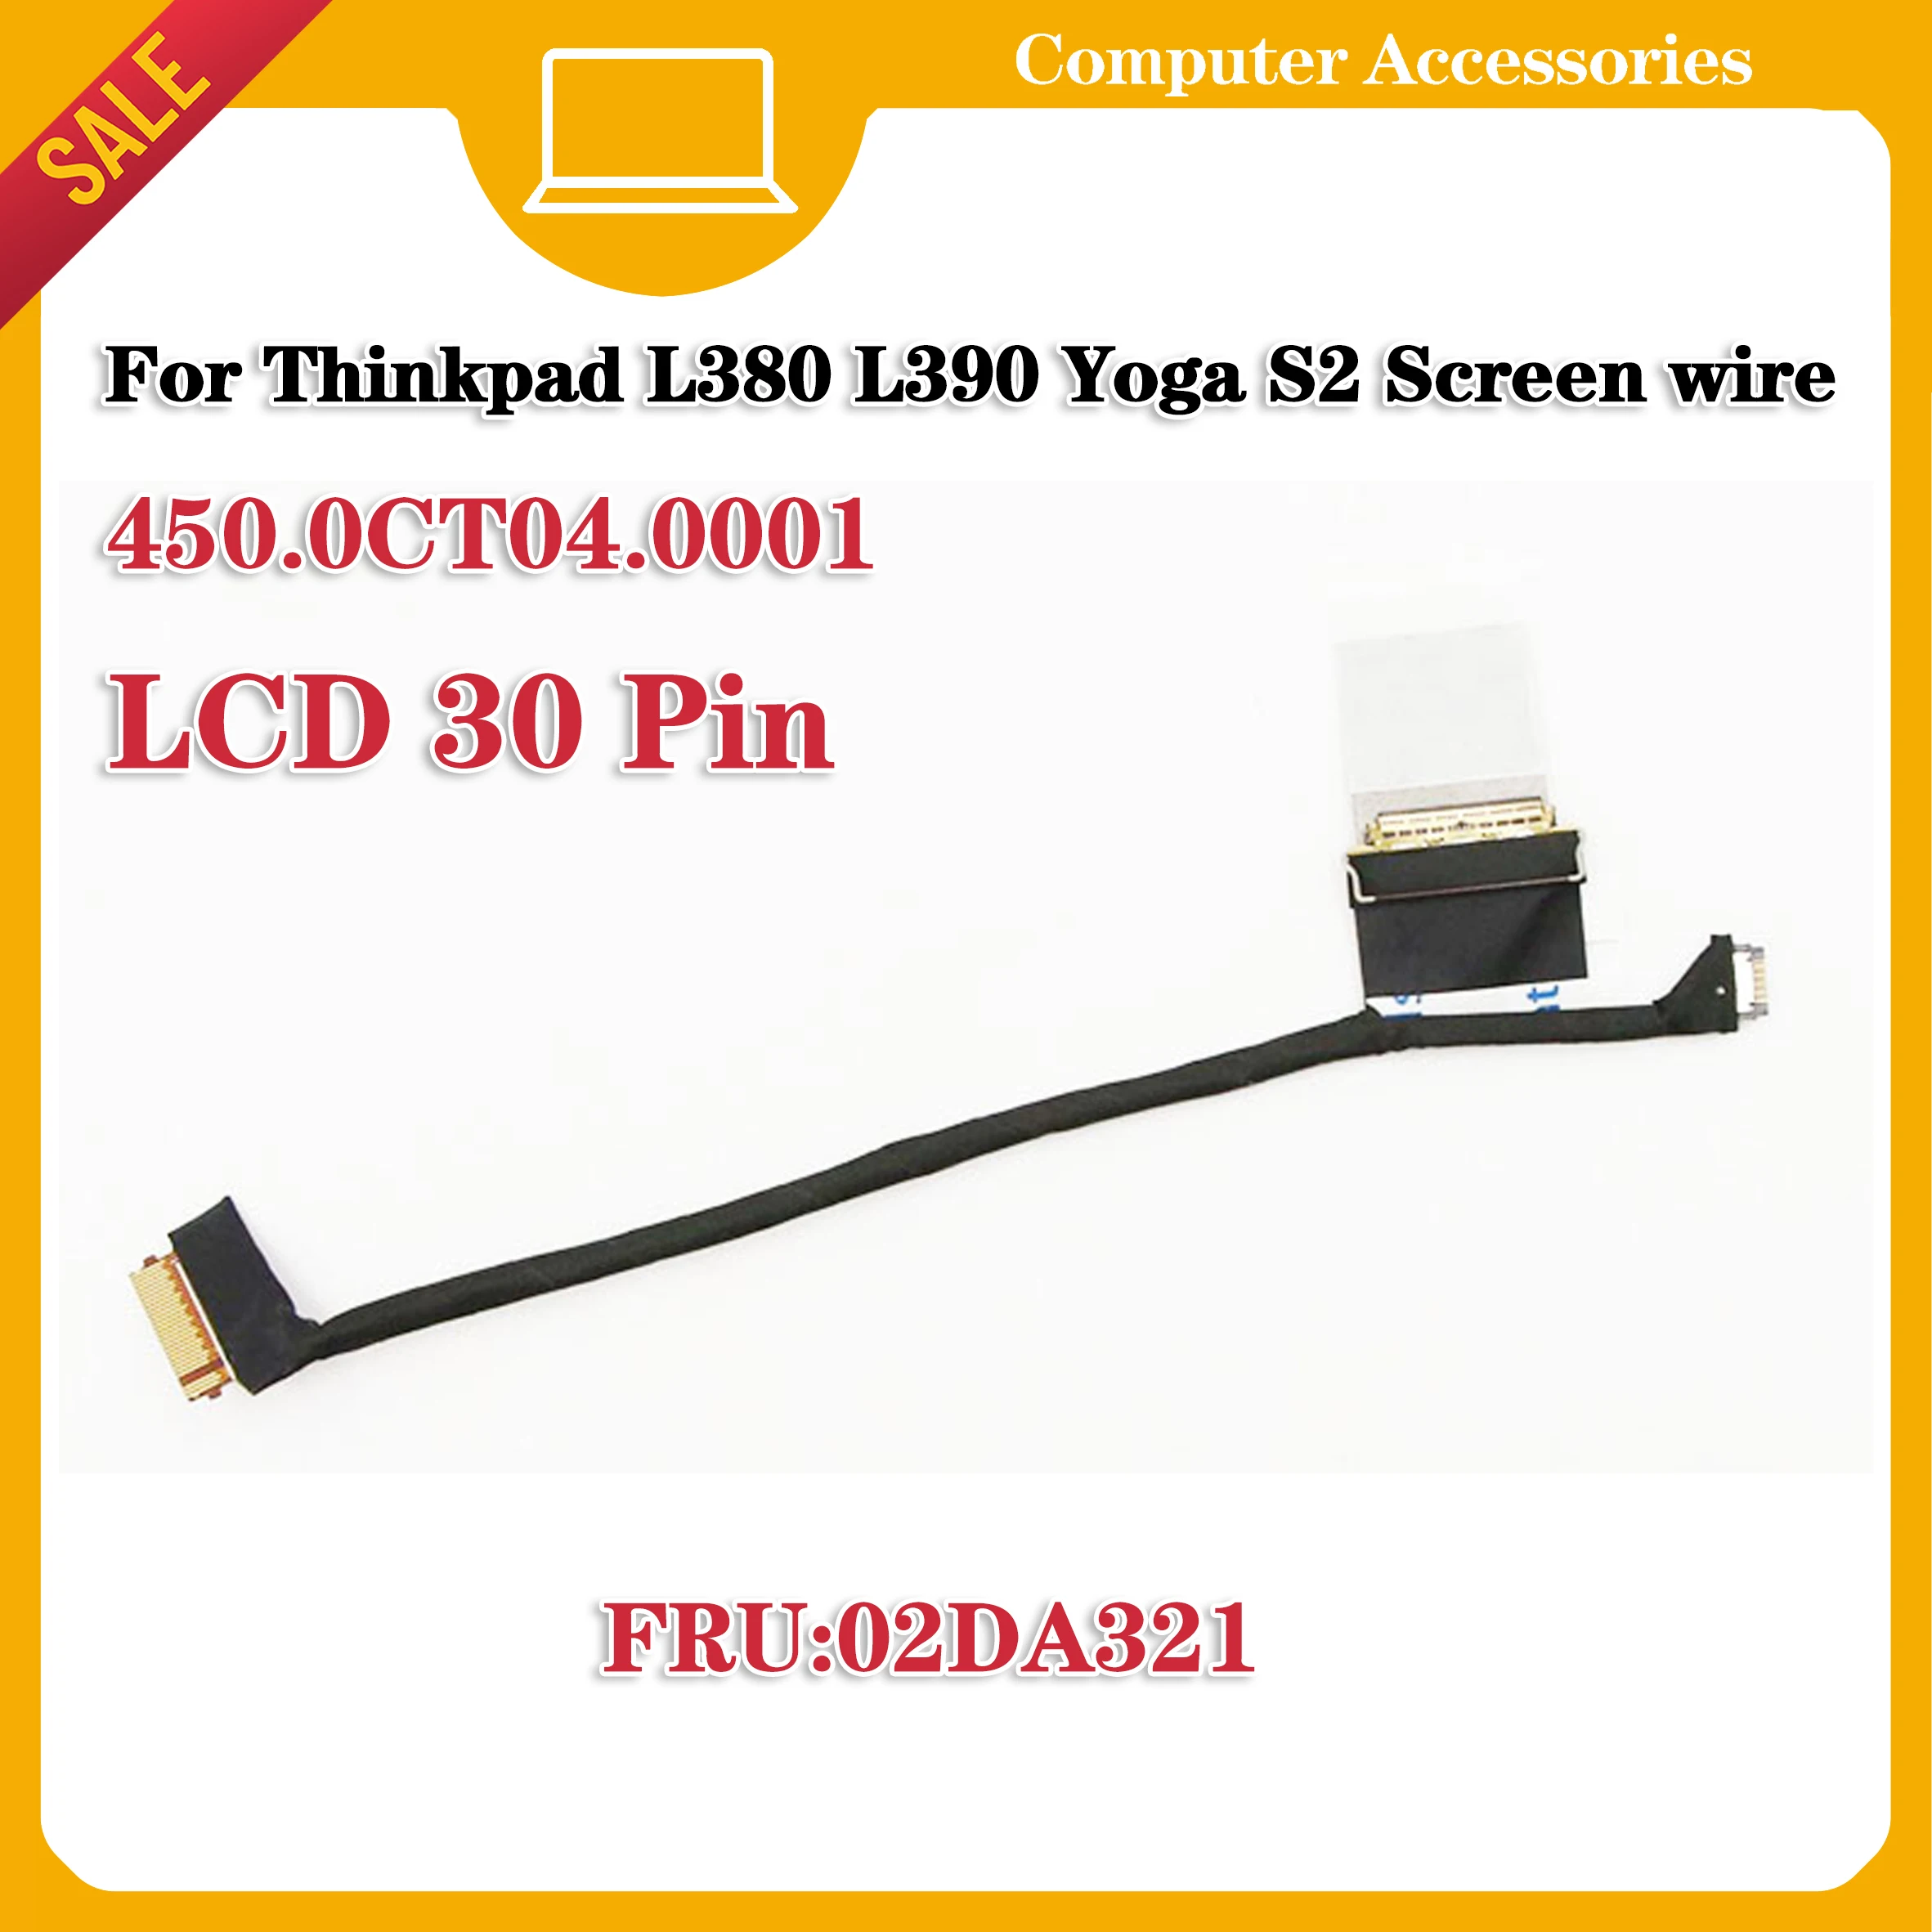 Applicable to Lenovo ThinkPad S2 3RD L380 screen cable Yoga flat cable EDP original data cable 02DA321 450.0CT04.0001